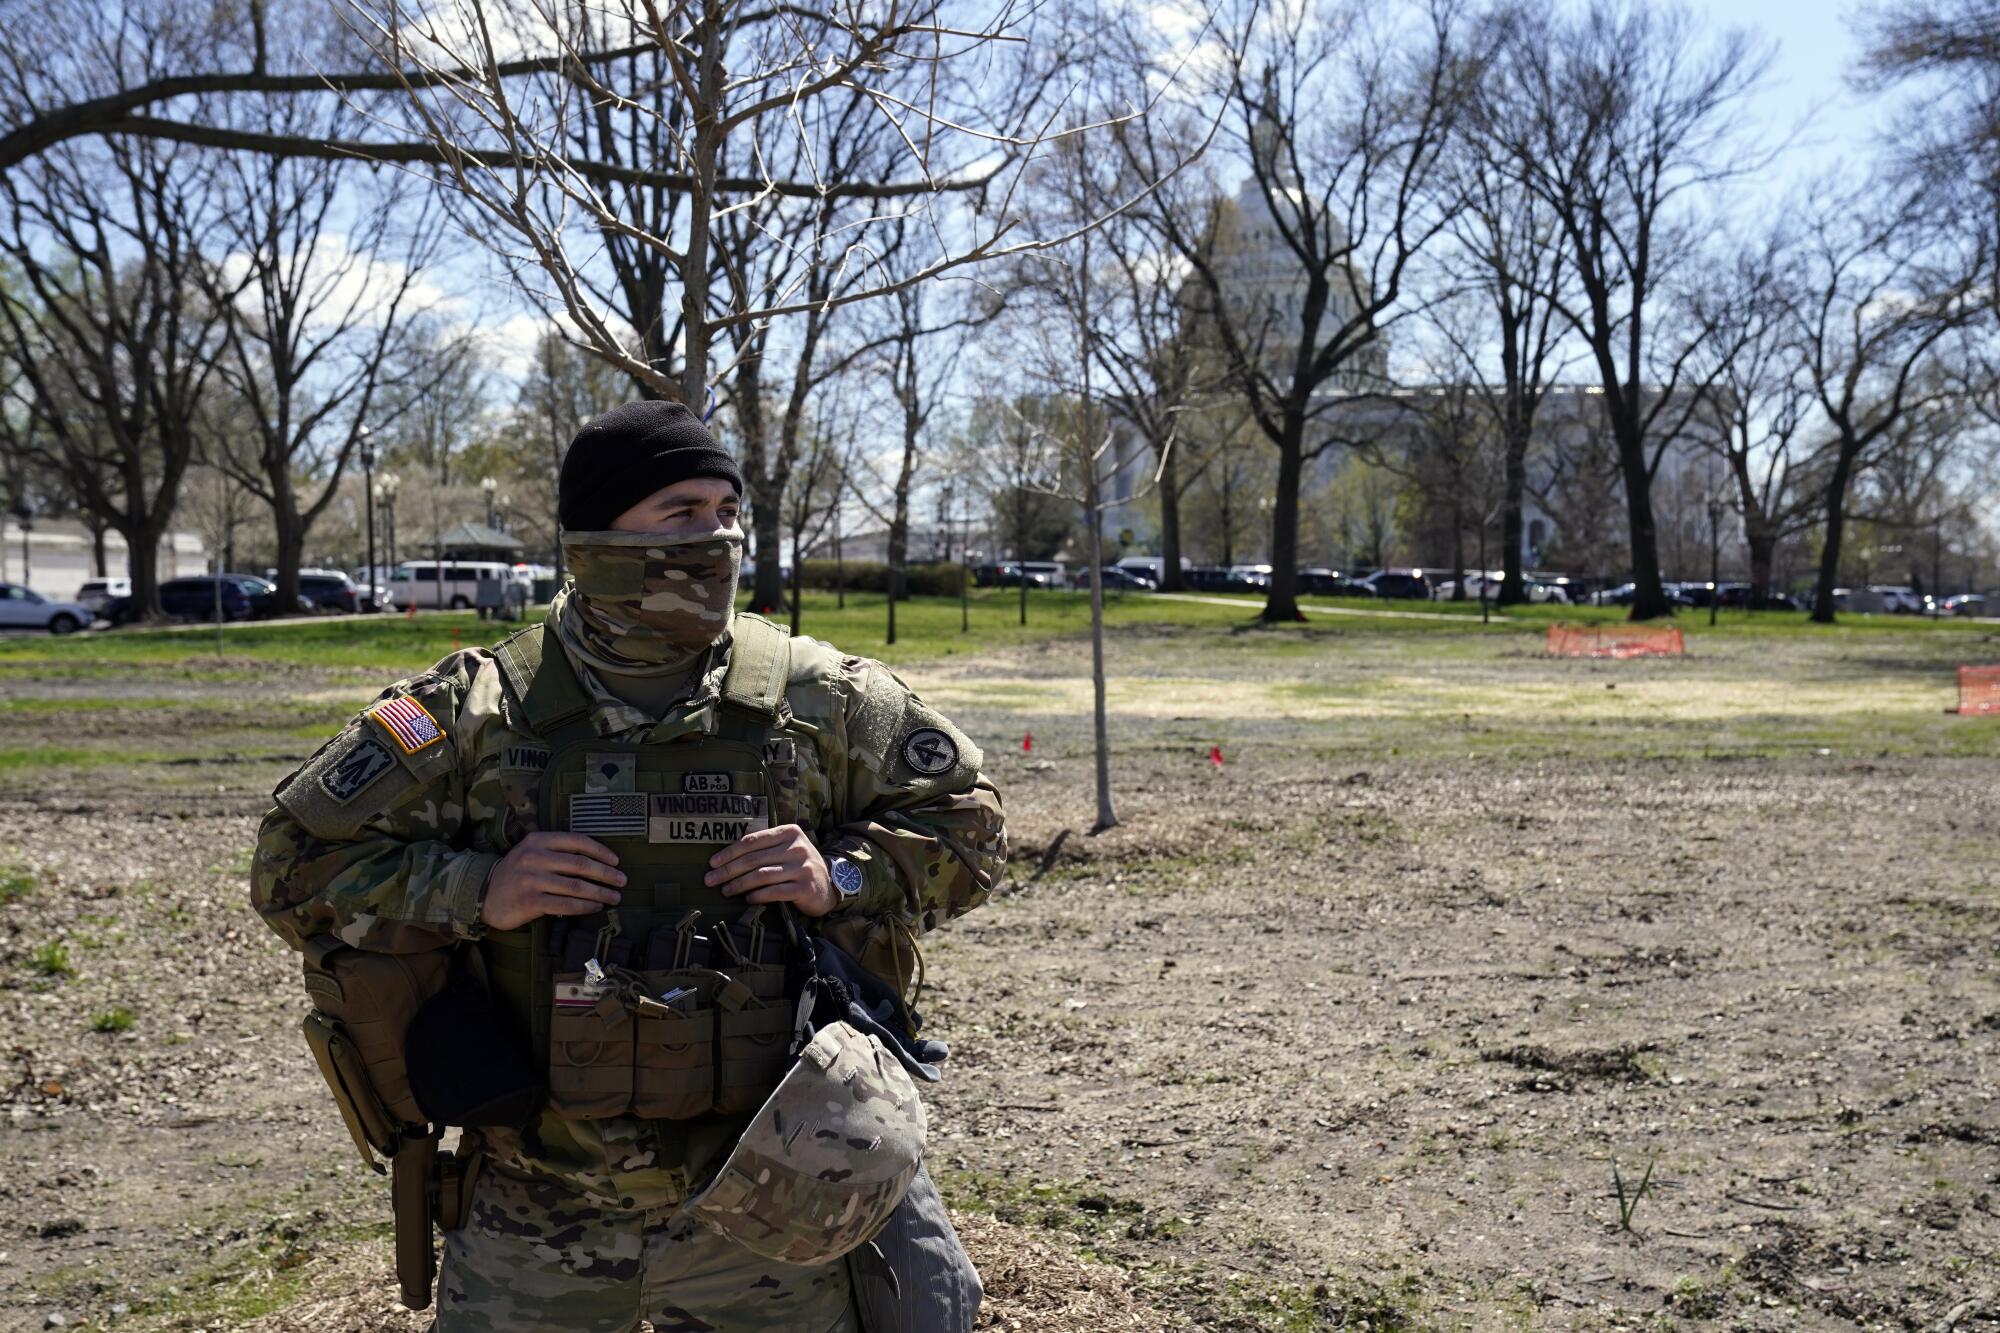 A member of the National Guard patrols near the U.S. Capitol after a car crashed into a barrier on Capitol Hill 